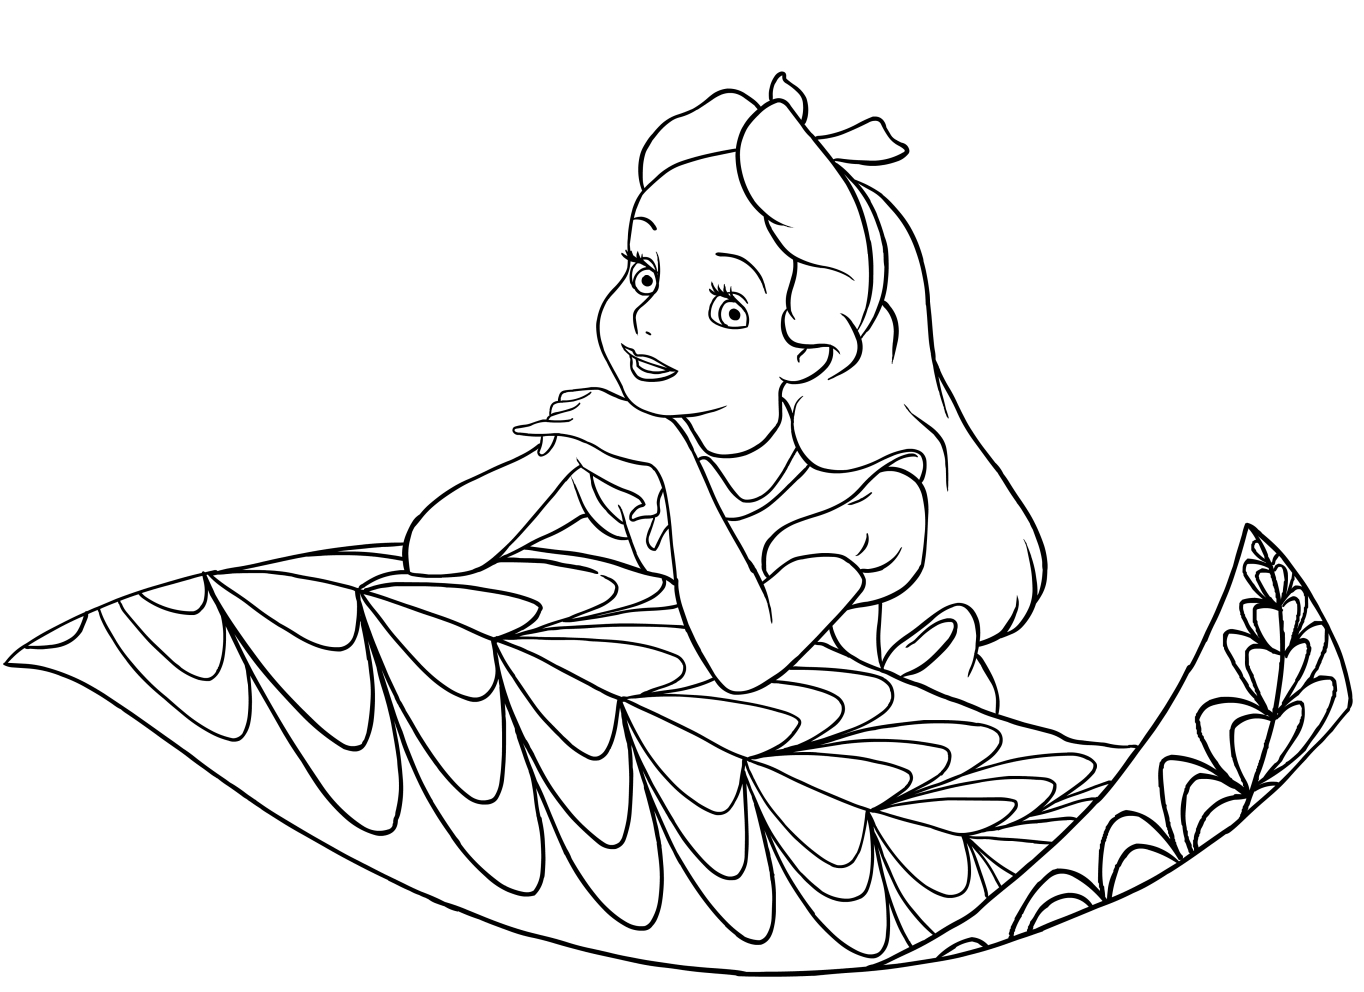  Alice on the leaf, coloring page to print